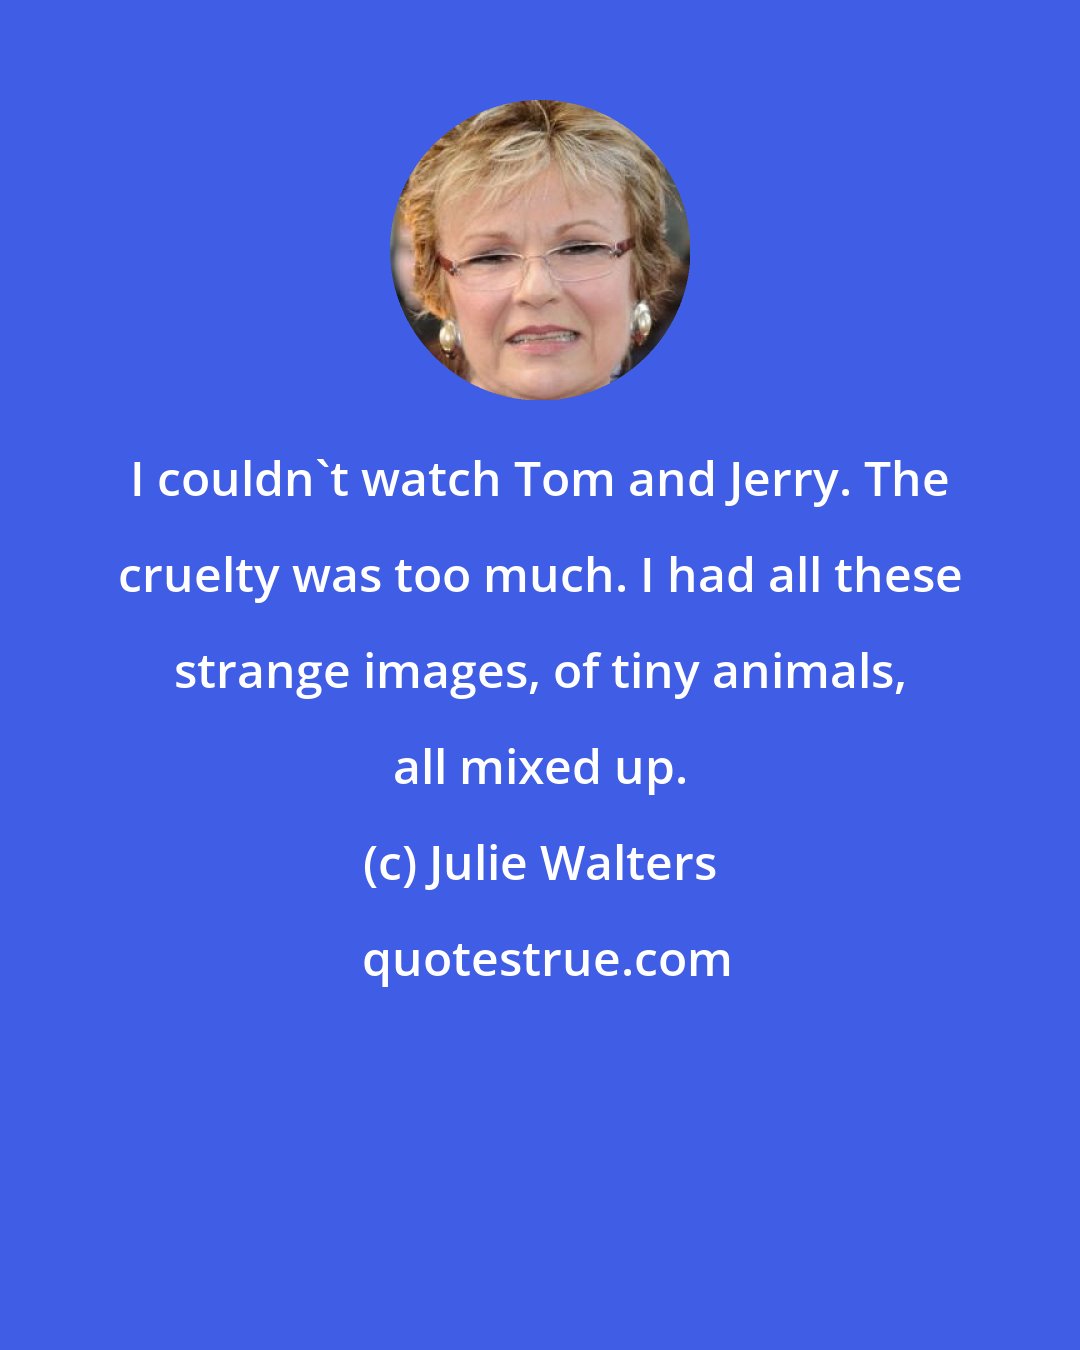 Julie Walters: I couldn't watch Tom and Jerry. The cruelty was too much. I had all these strange images, of tiny animals, all mixed up.